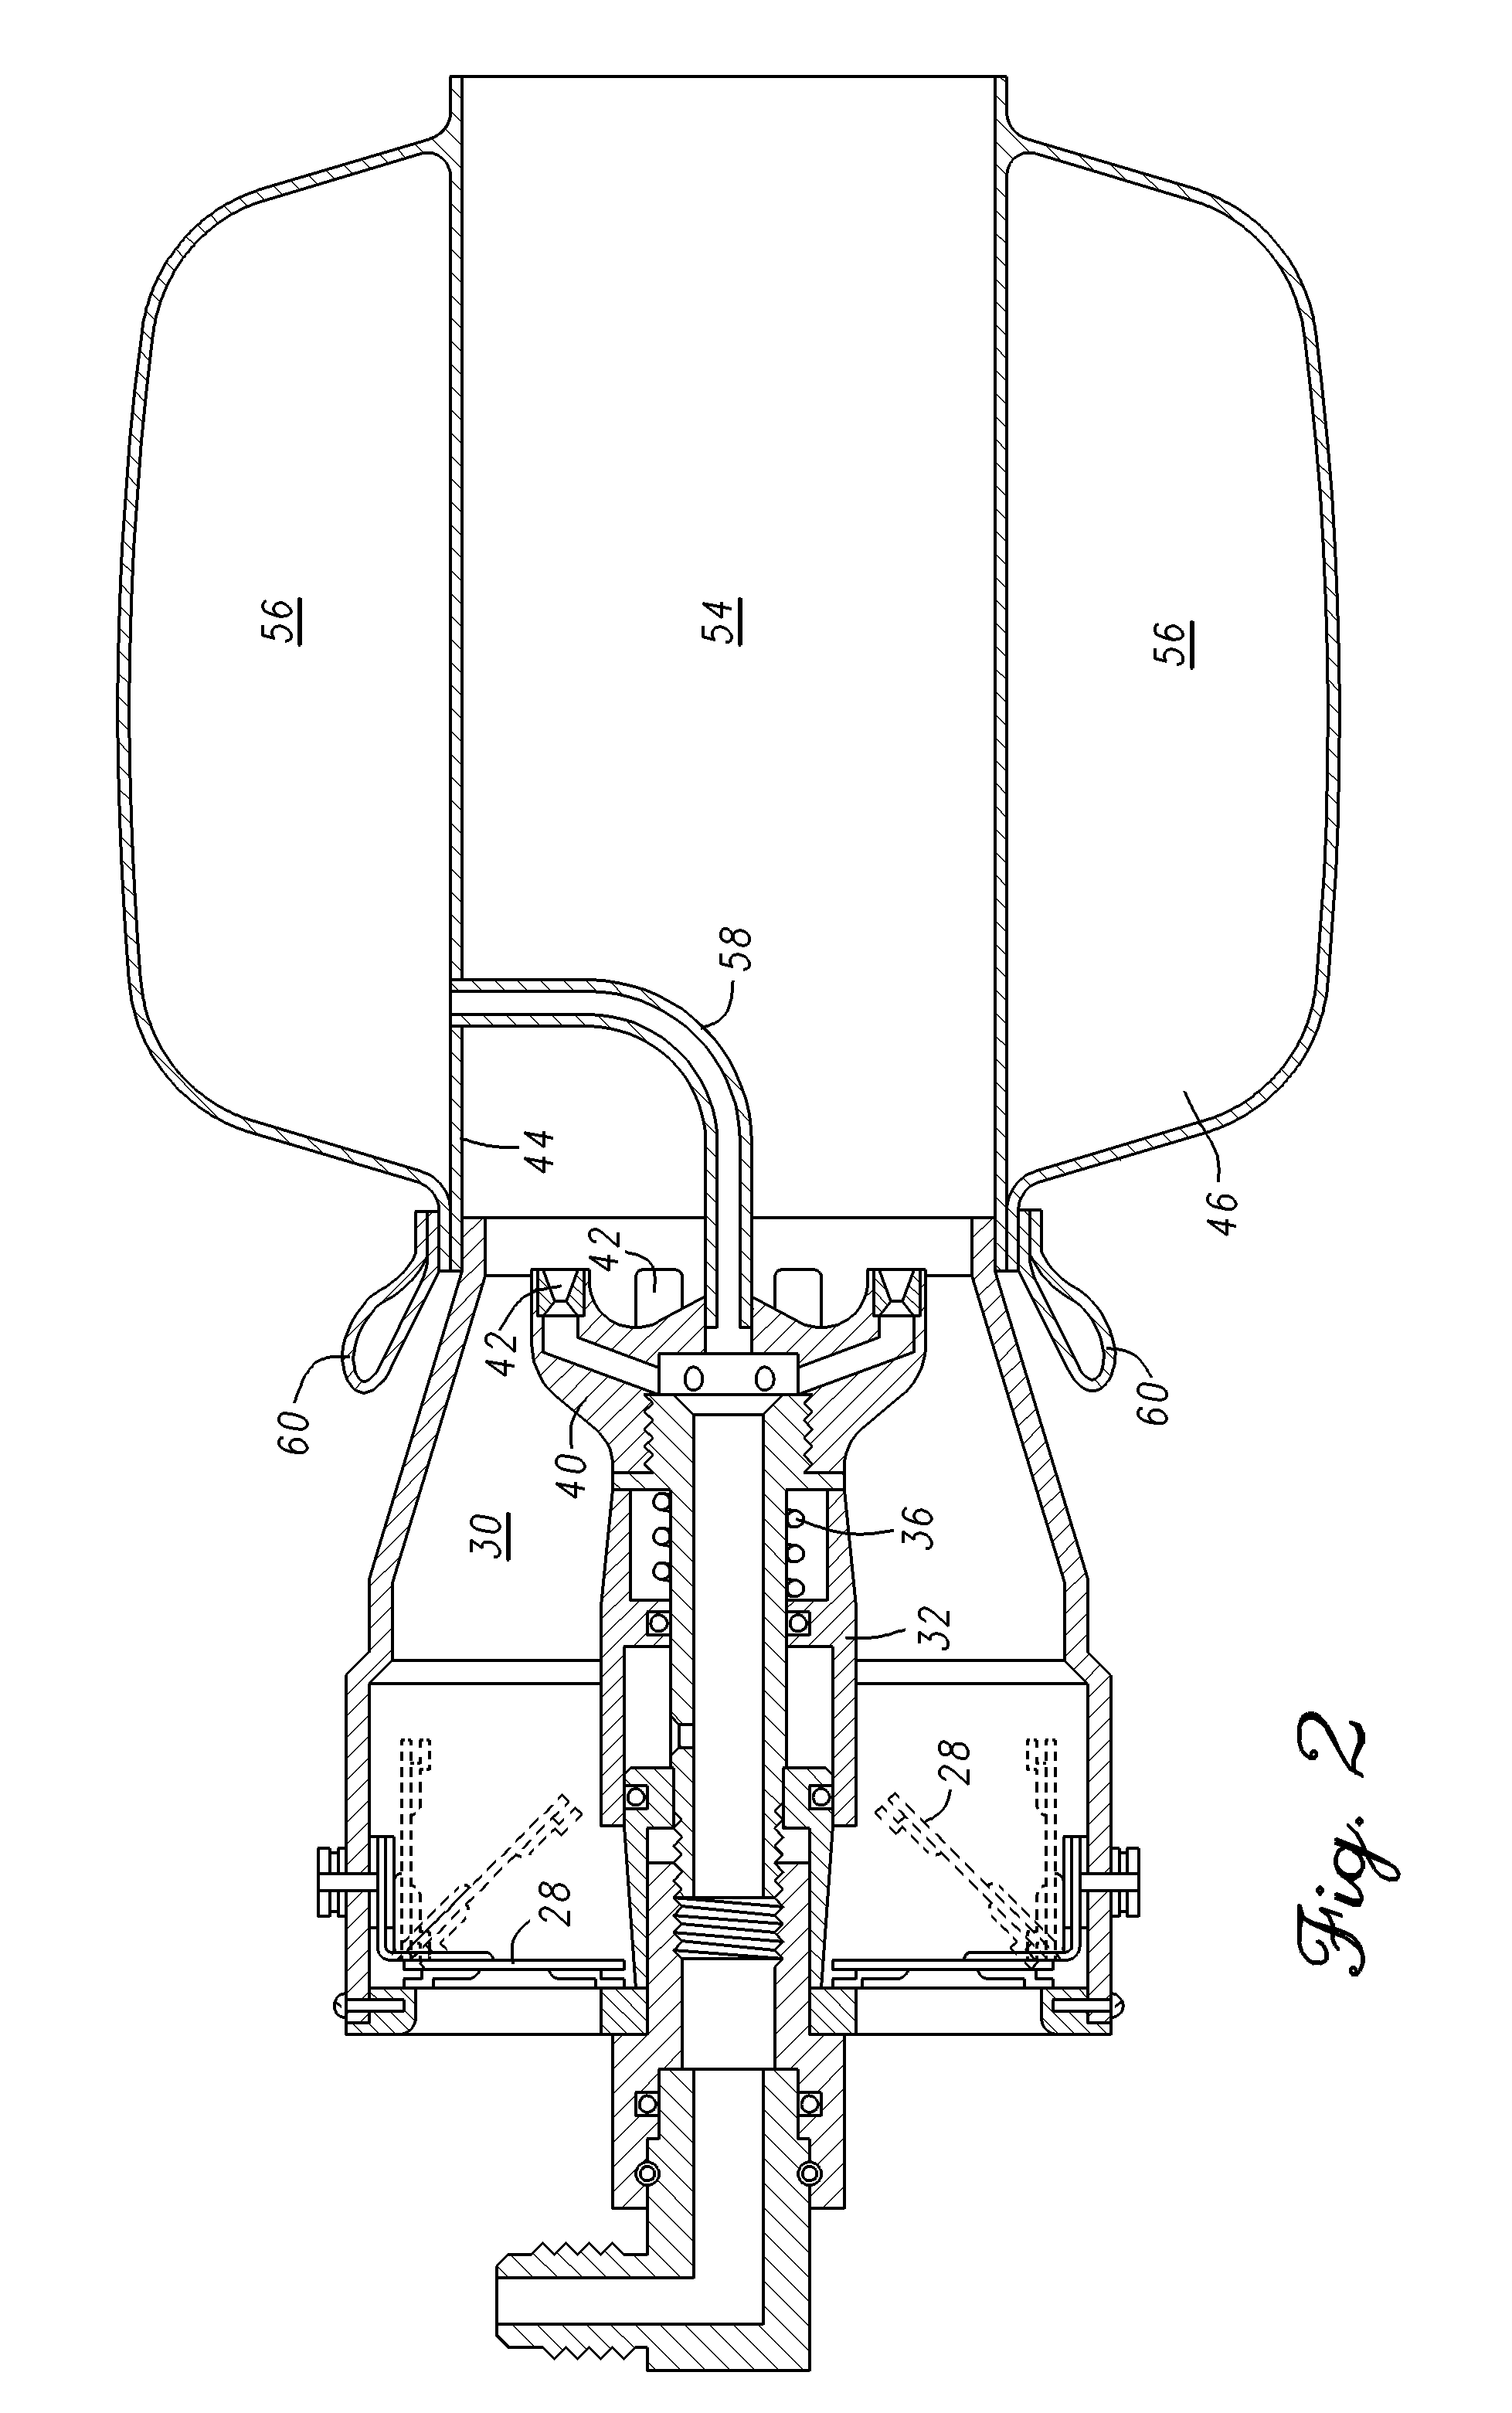 Inflation aspirator with collapsible barrel